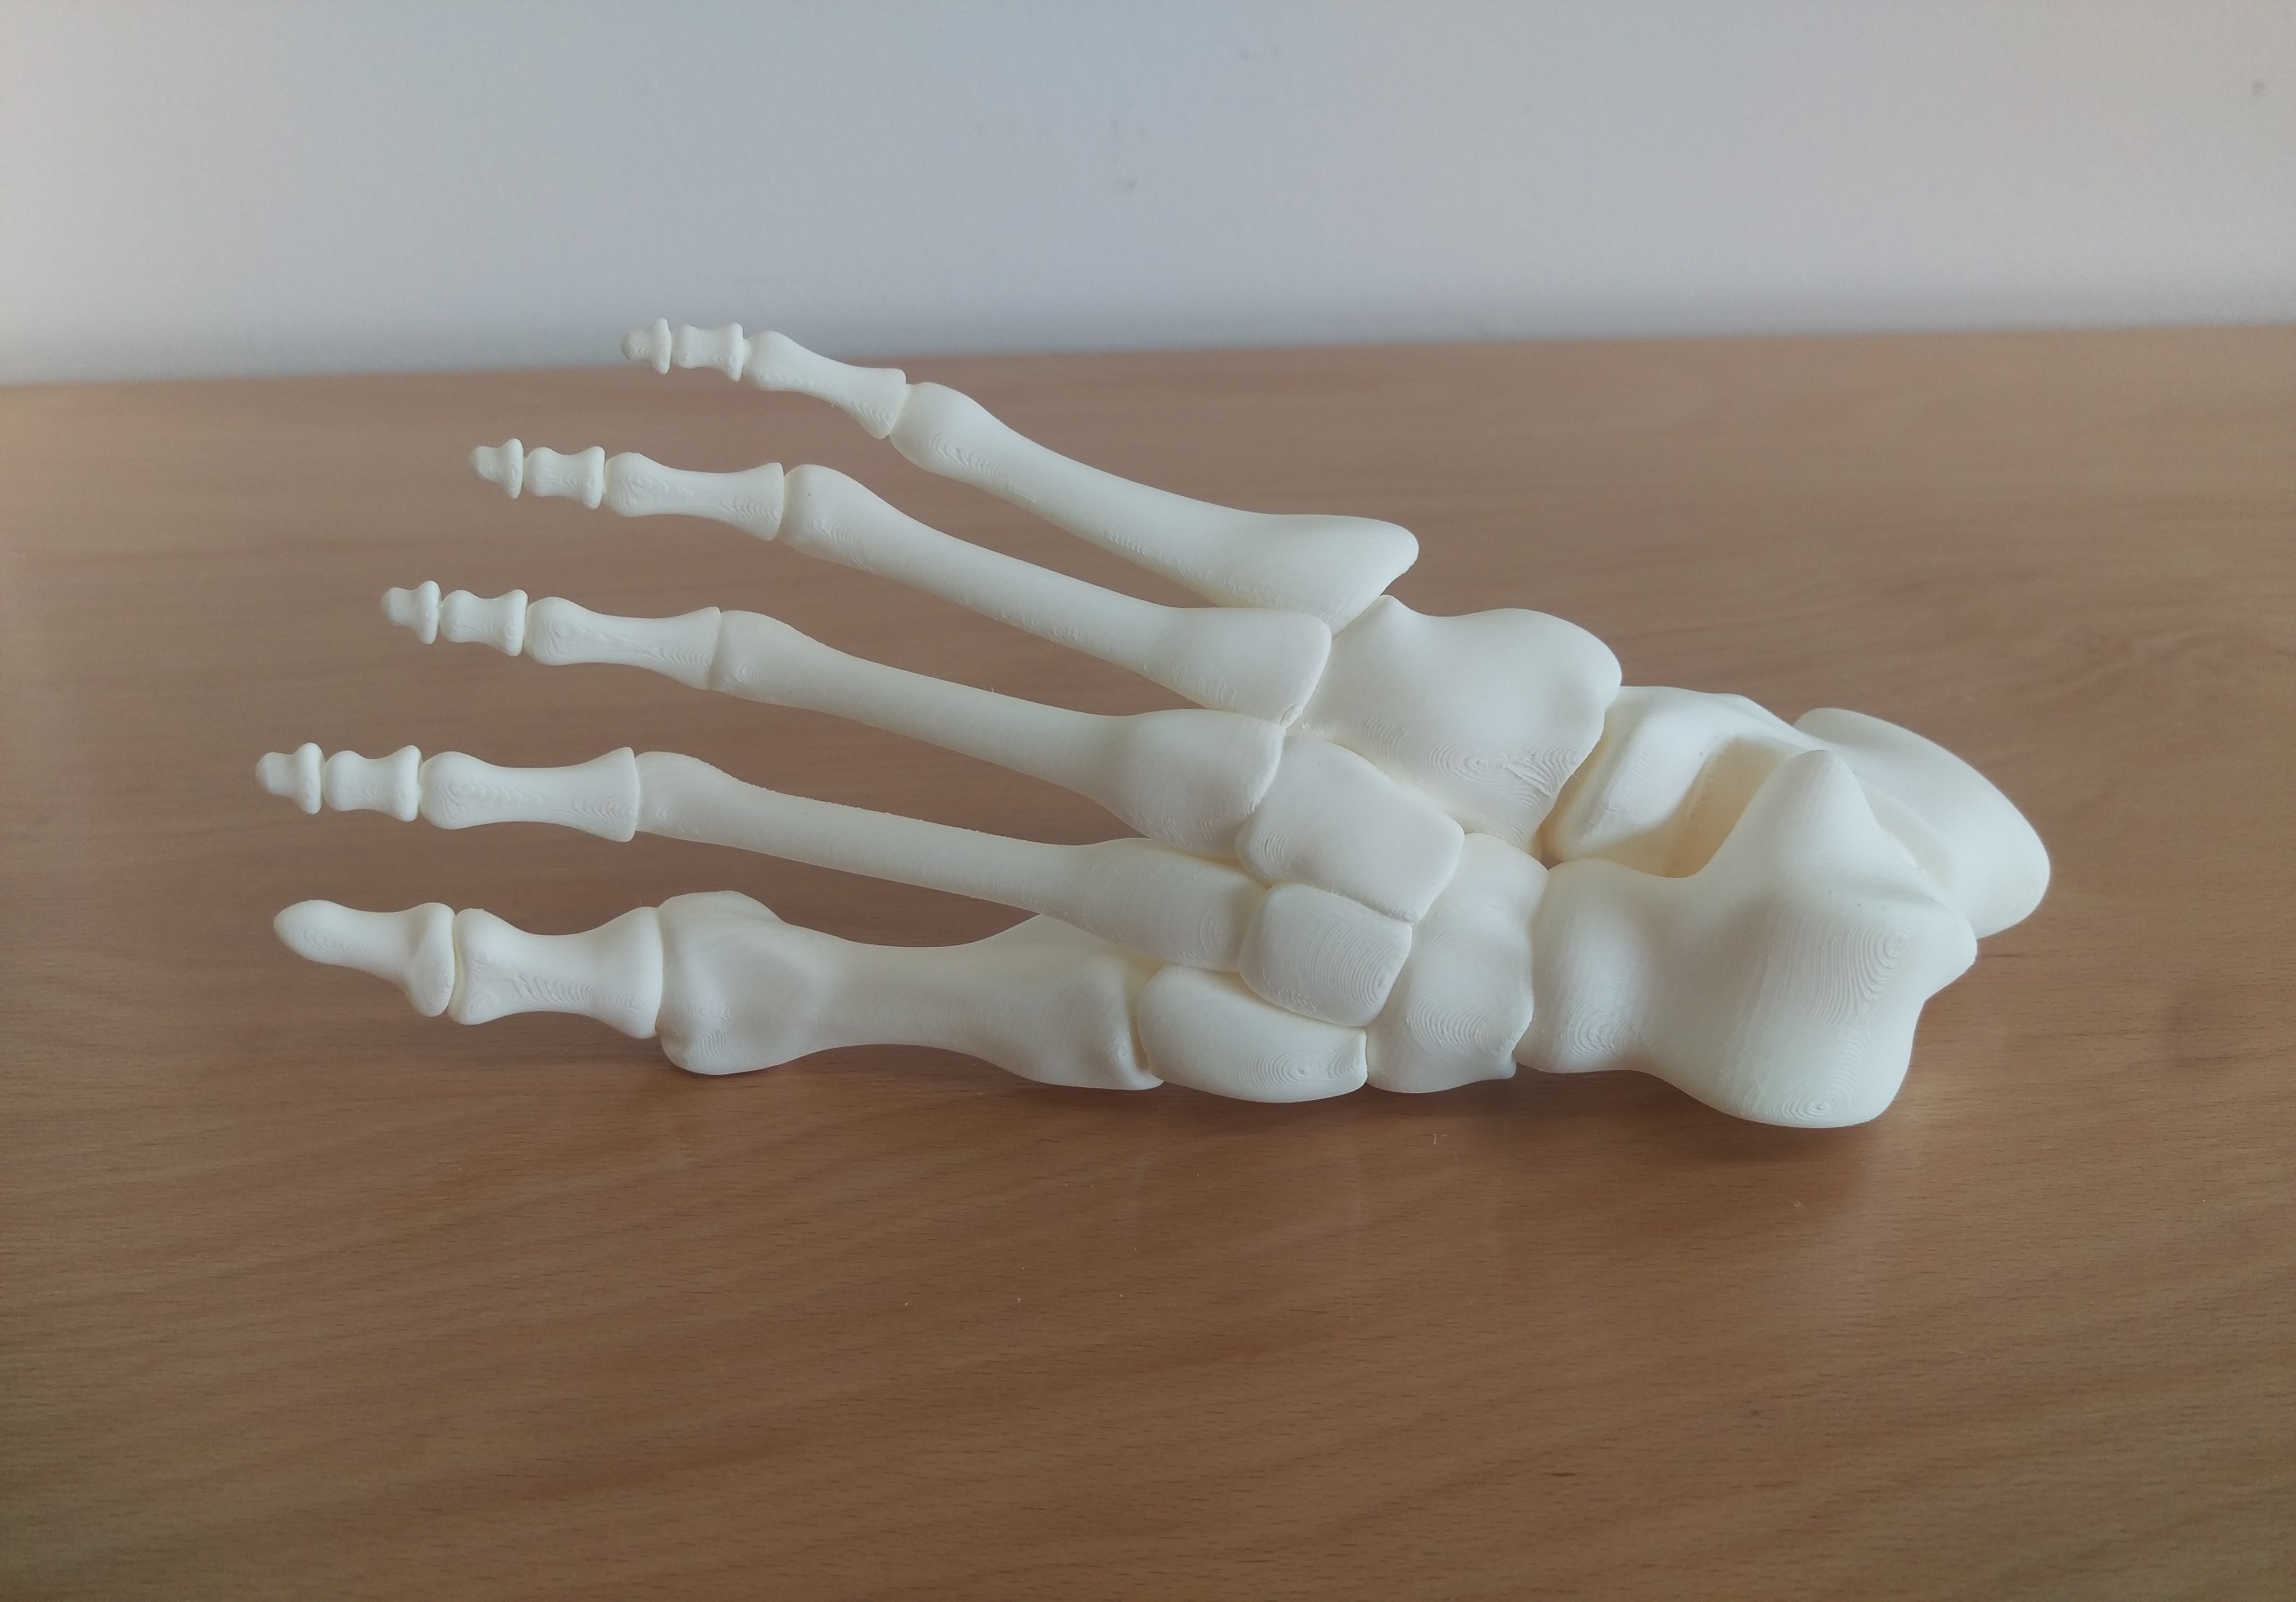 Guy McCann's "Foot, Right Human Fully assembled" model with connected joints and bones